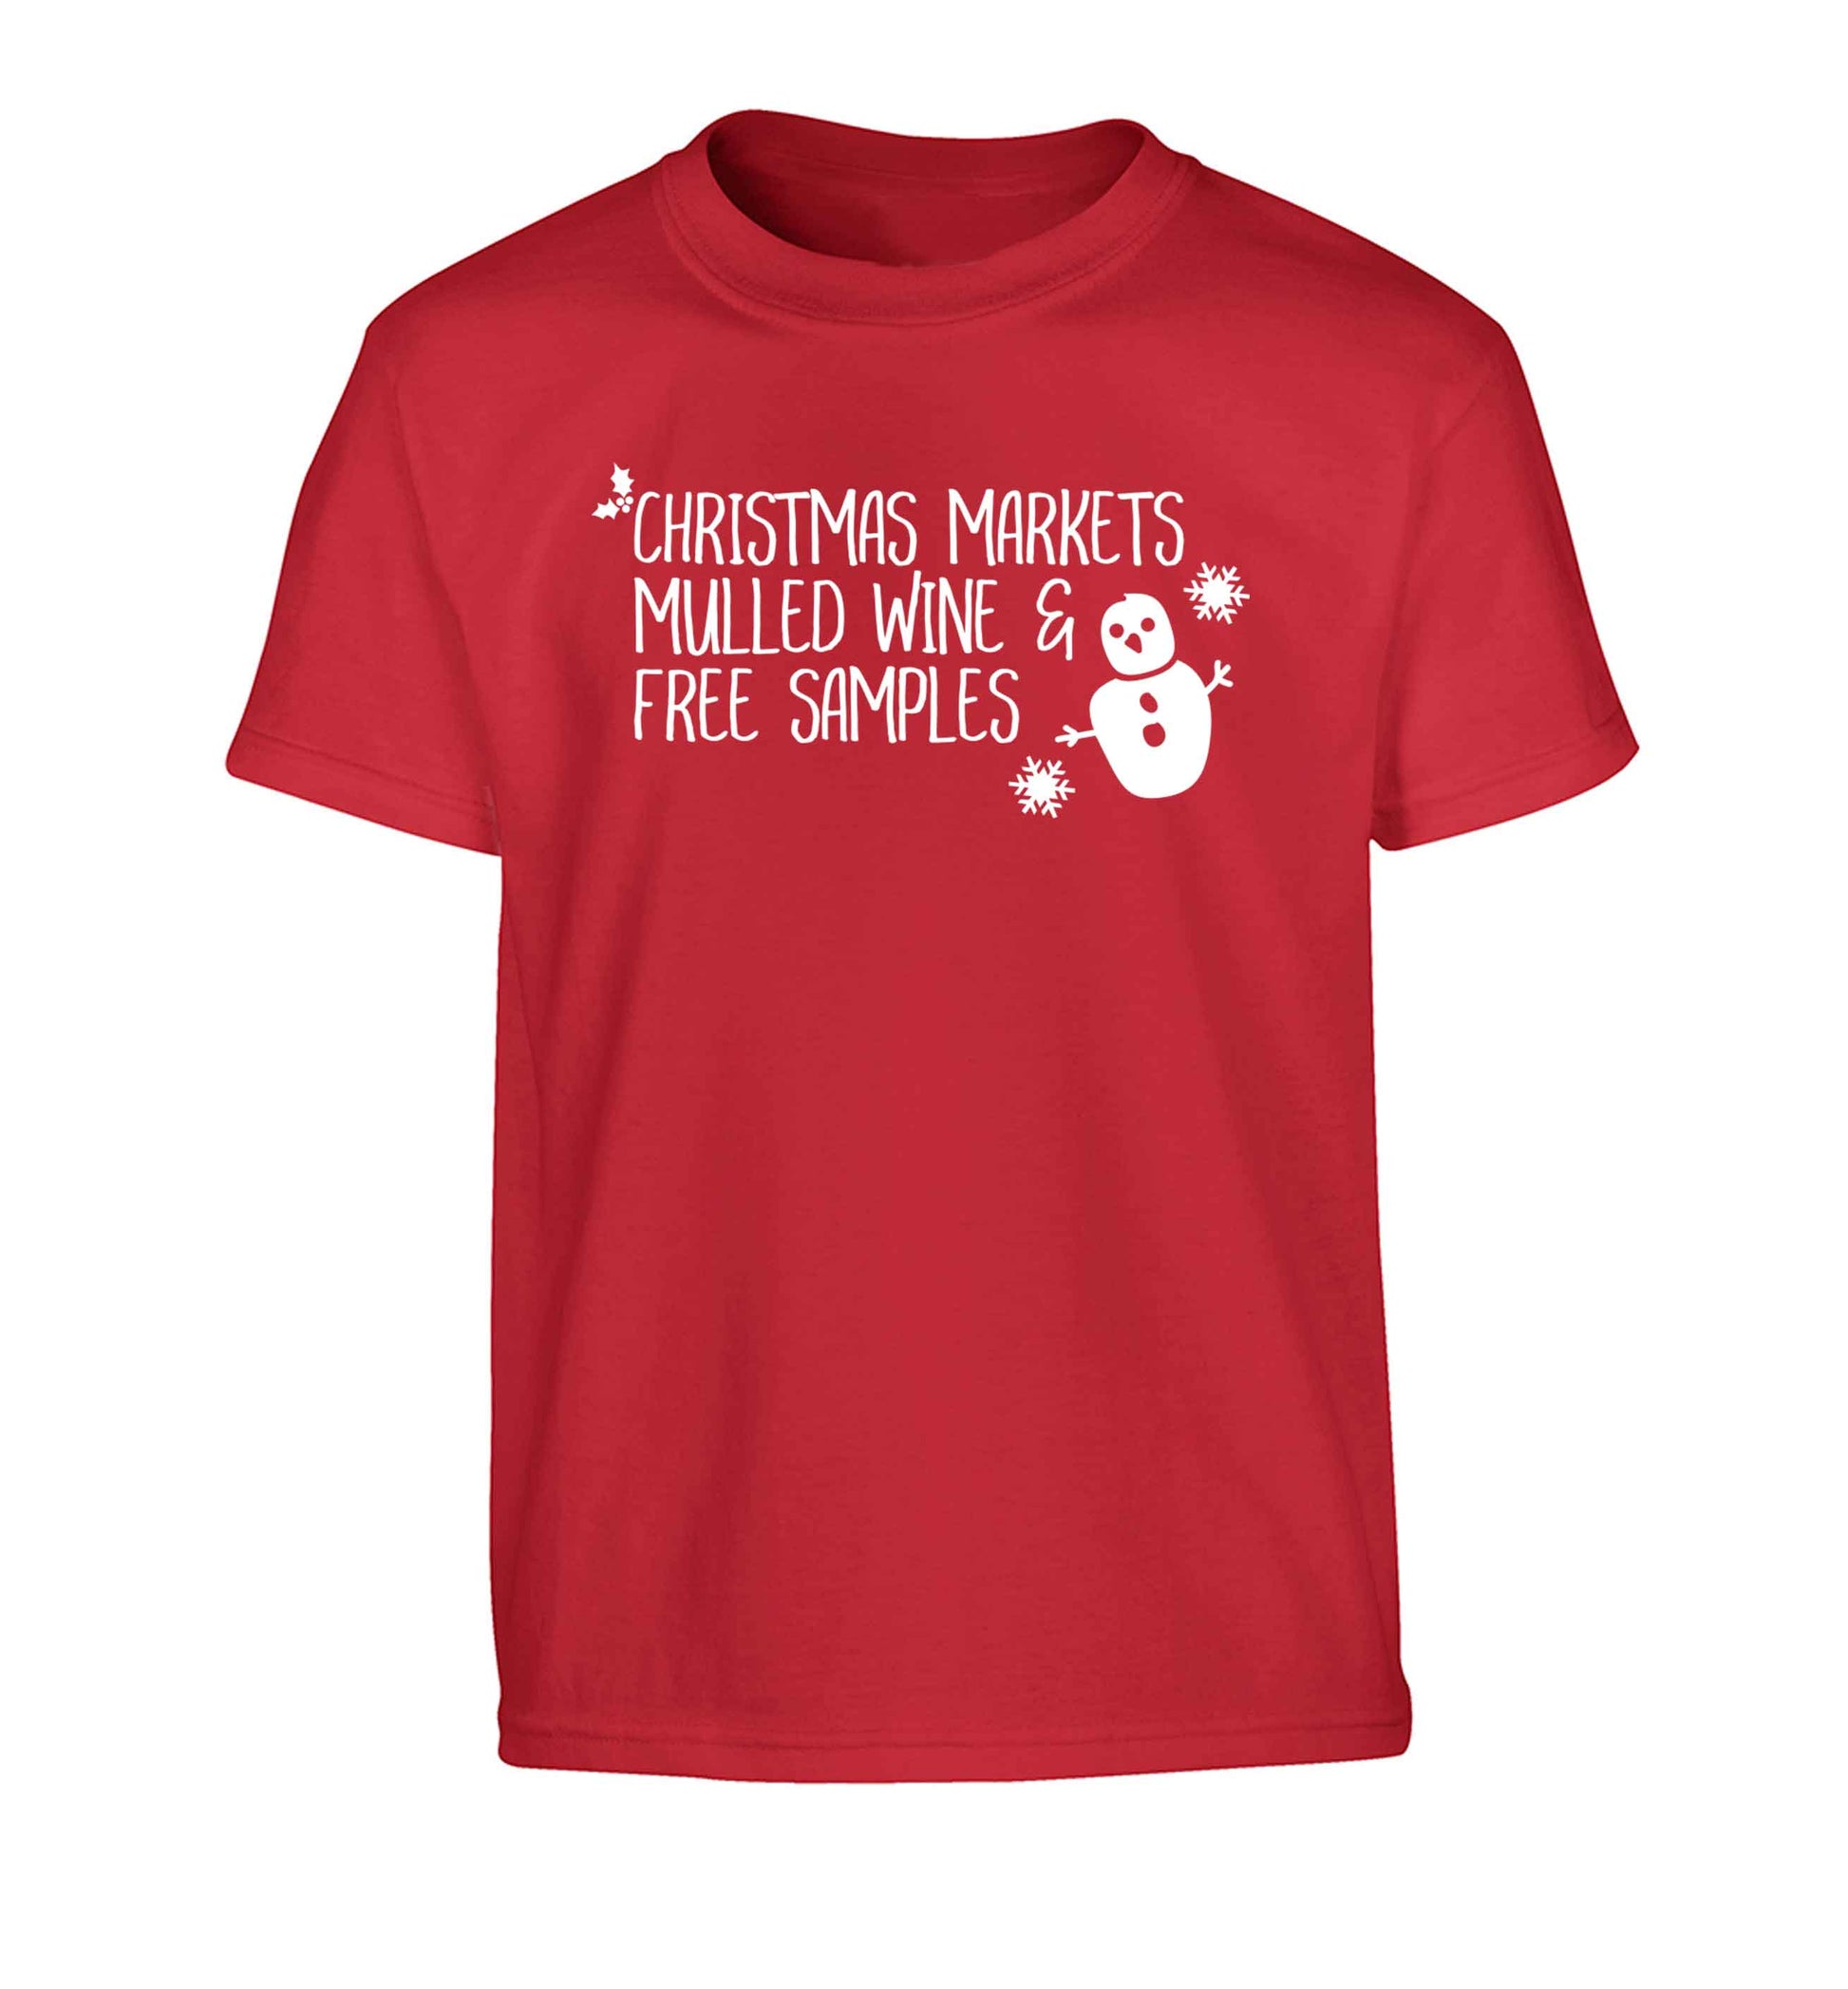 Christmas market mulled wine & free samples Children's red Tshirt 12-13 Years